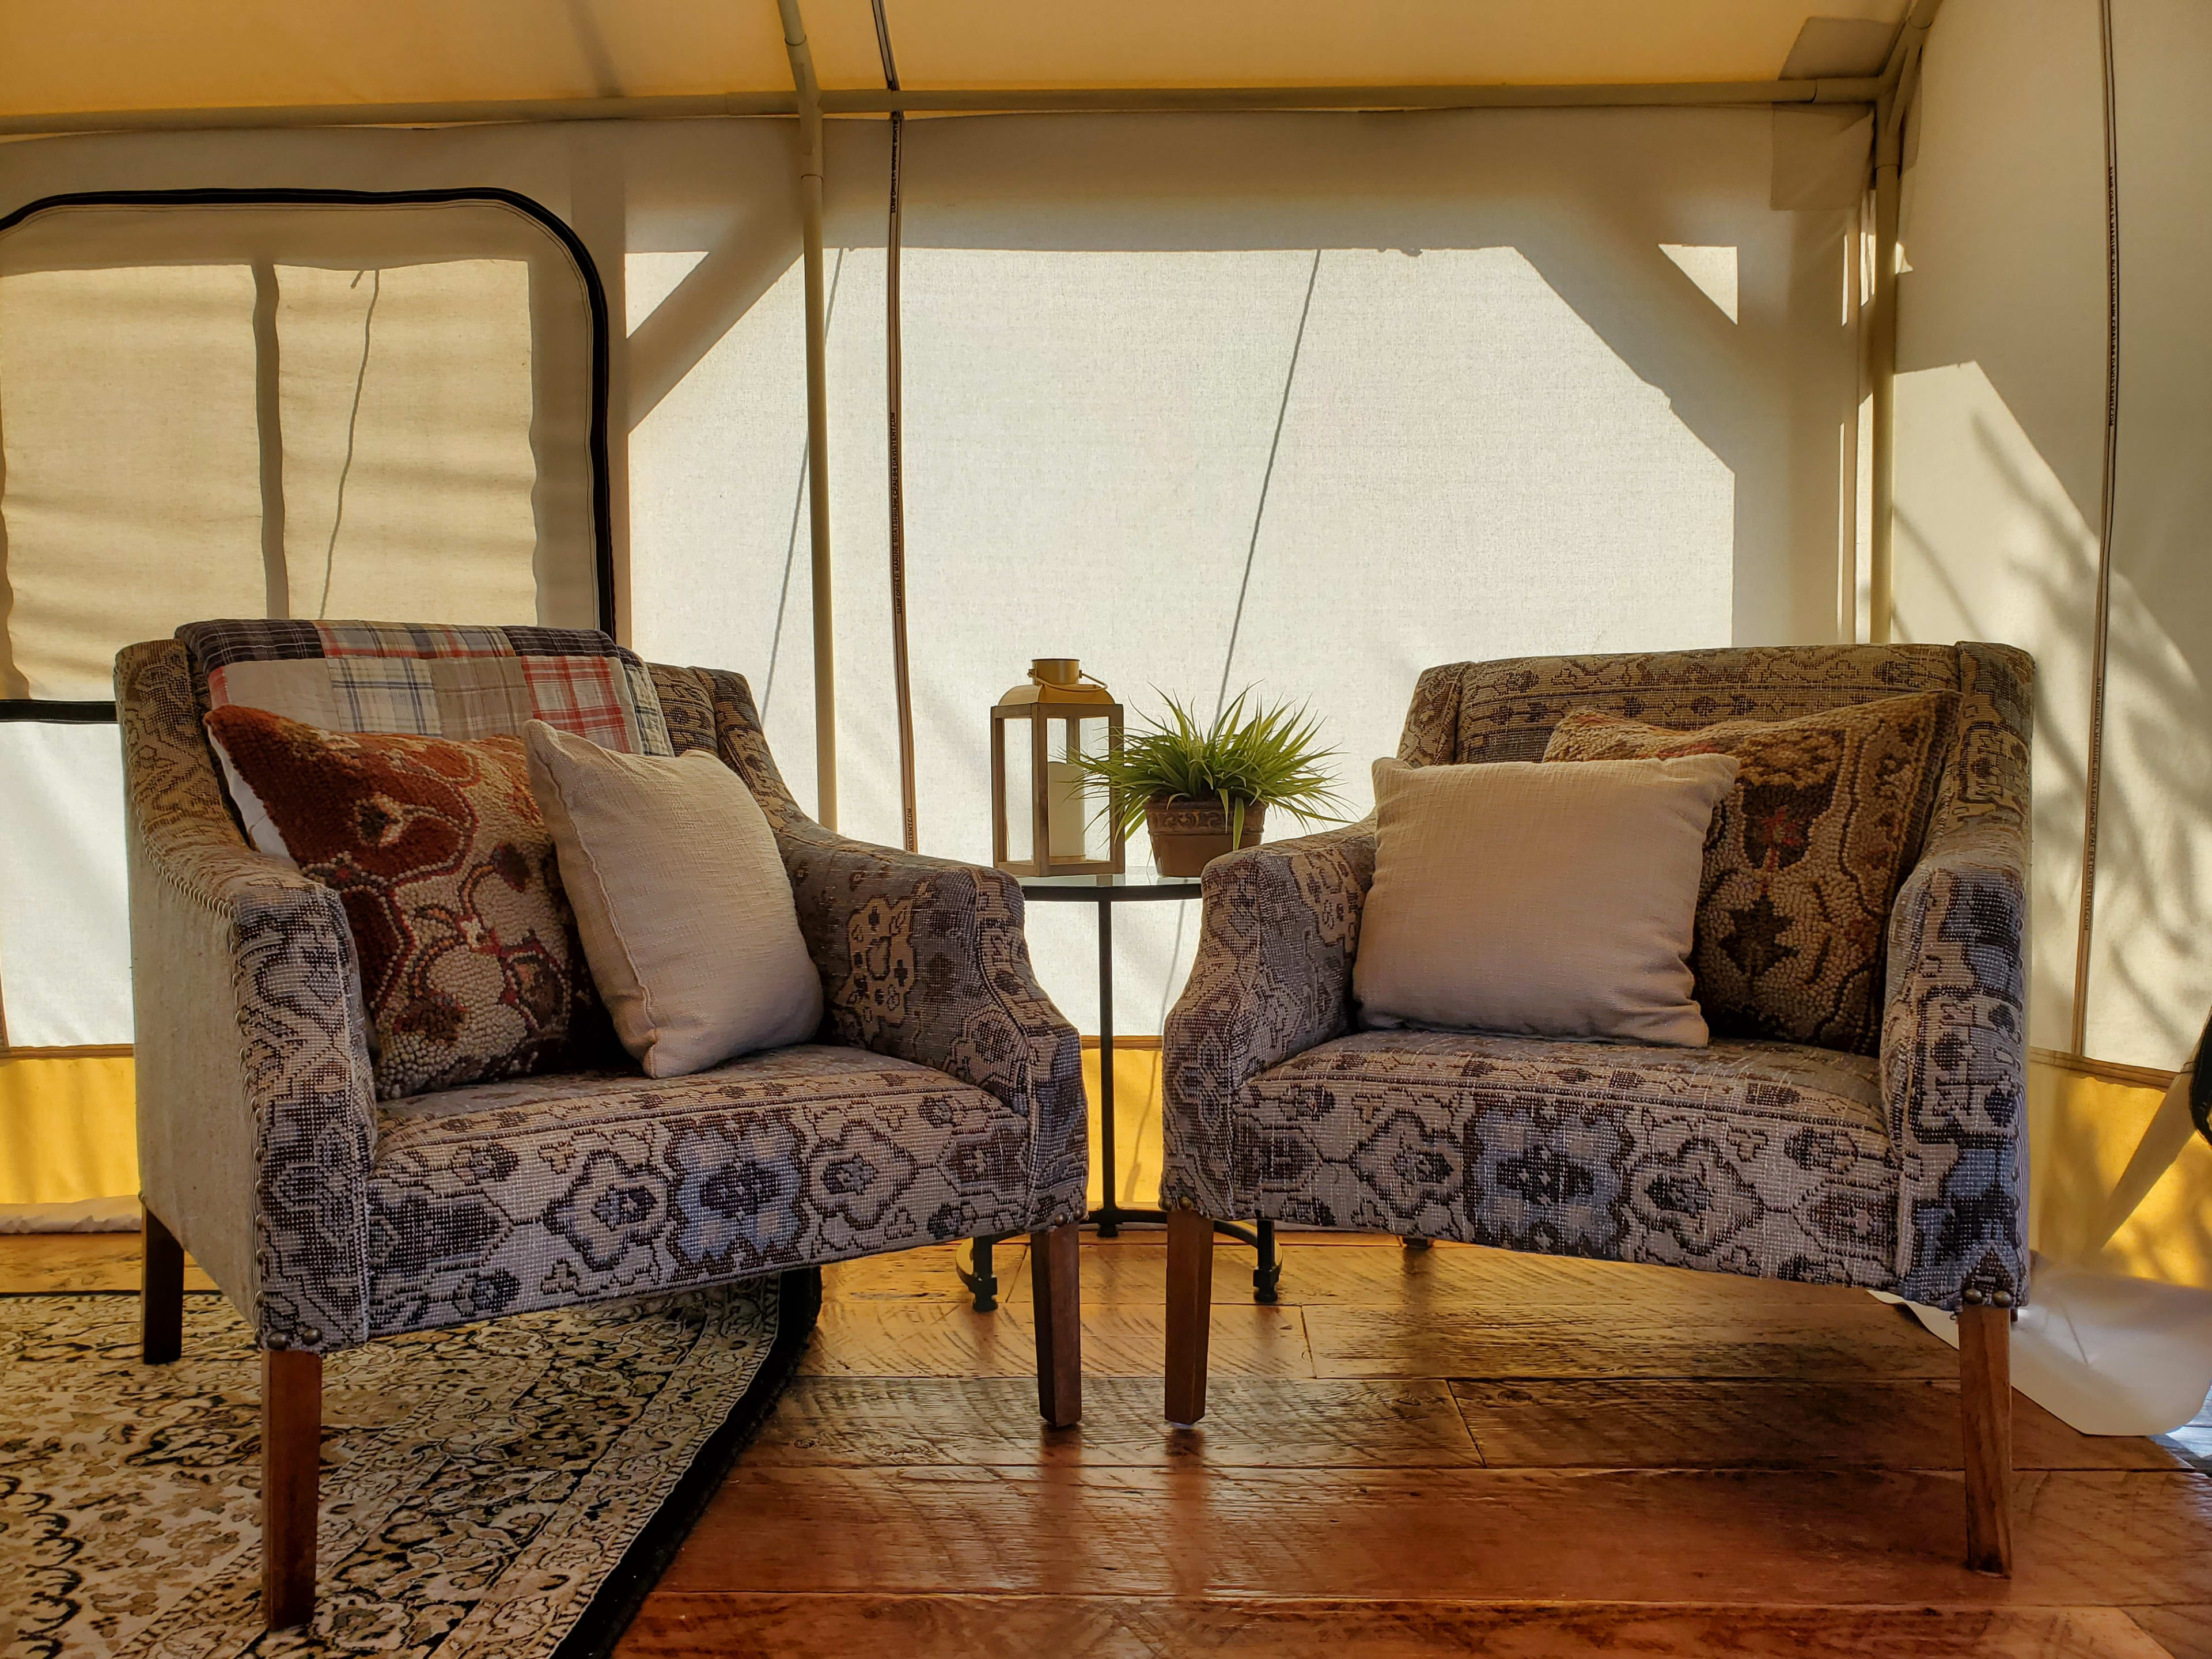 OUR NEW ADDITION: Luxury Glamping